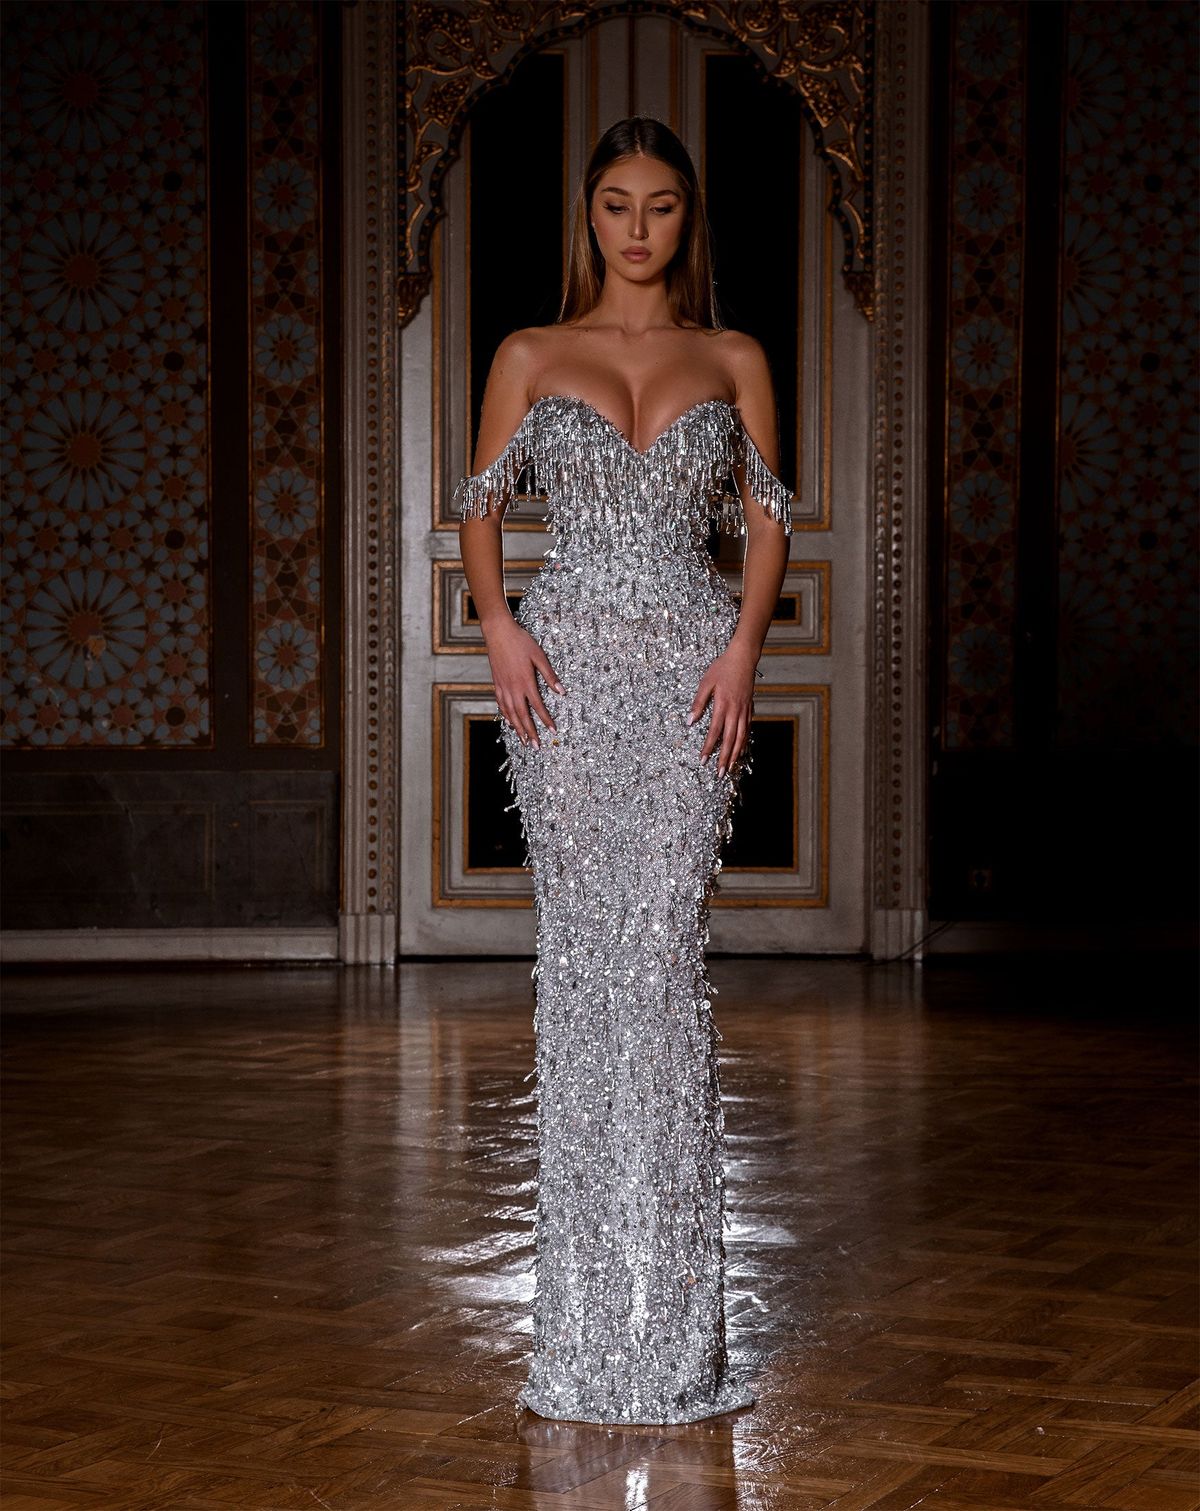 Silver Evening Gown (Look 30) from the Fall Winter 2018 / 2019